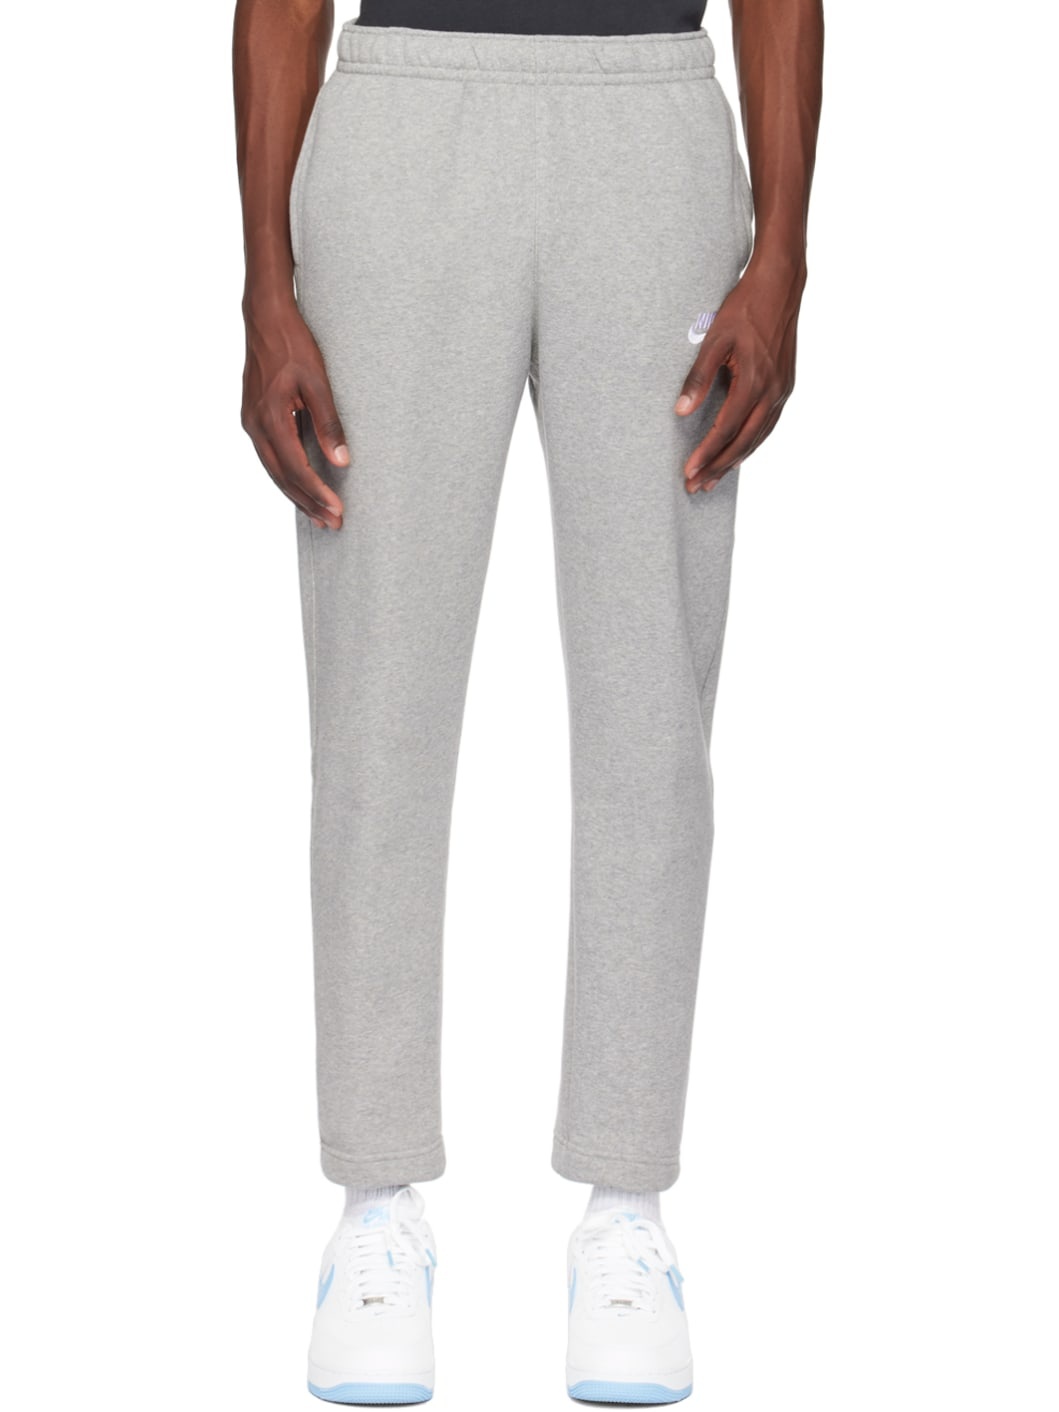 Gray Embroidered Sweatpants - 1